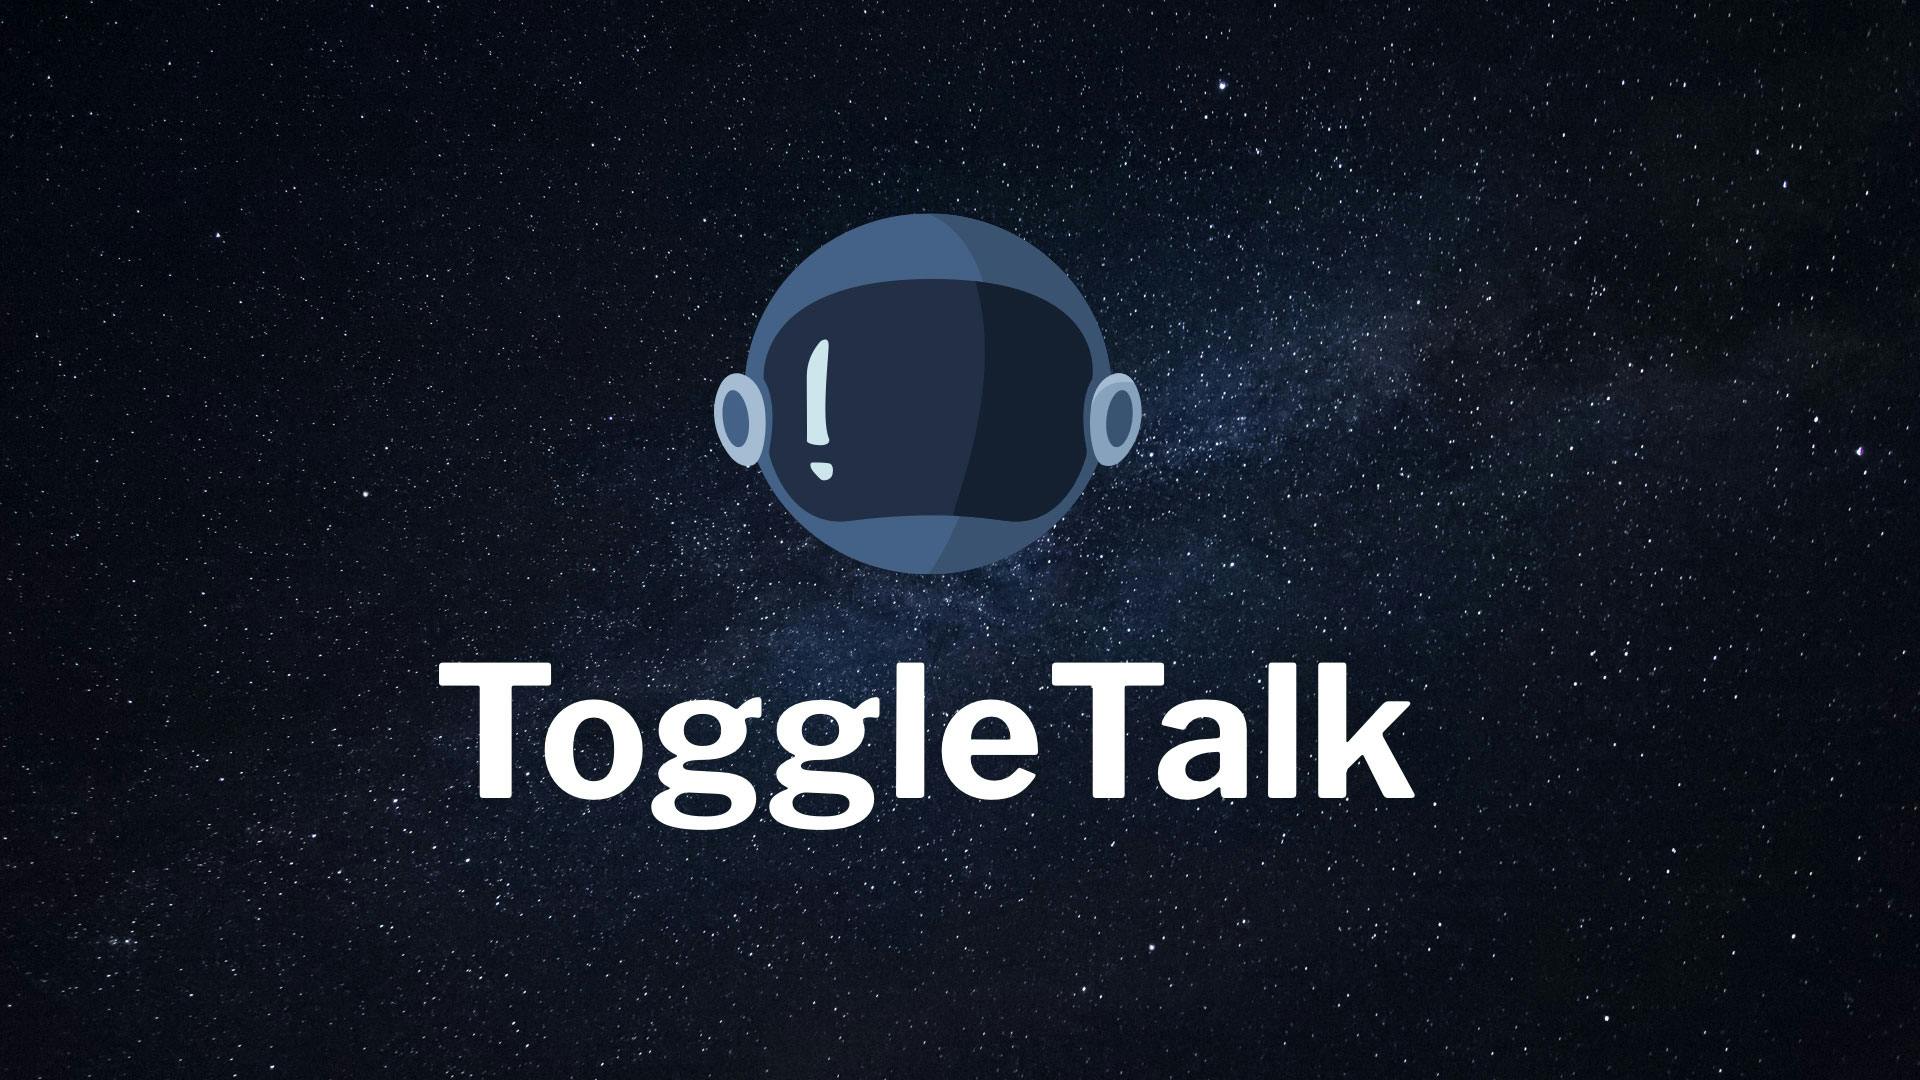 #ToggleTalk 1: My First Flag featured image